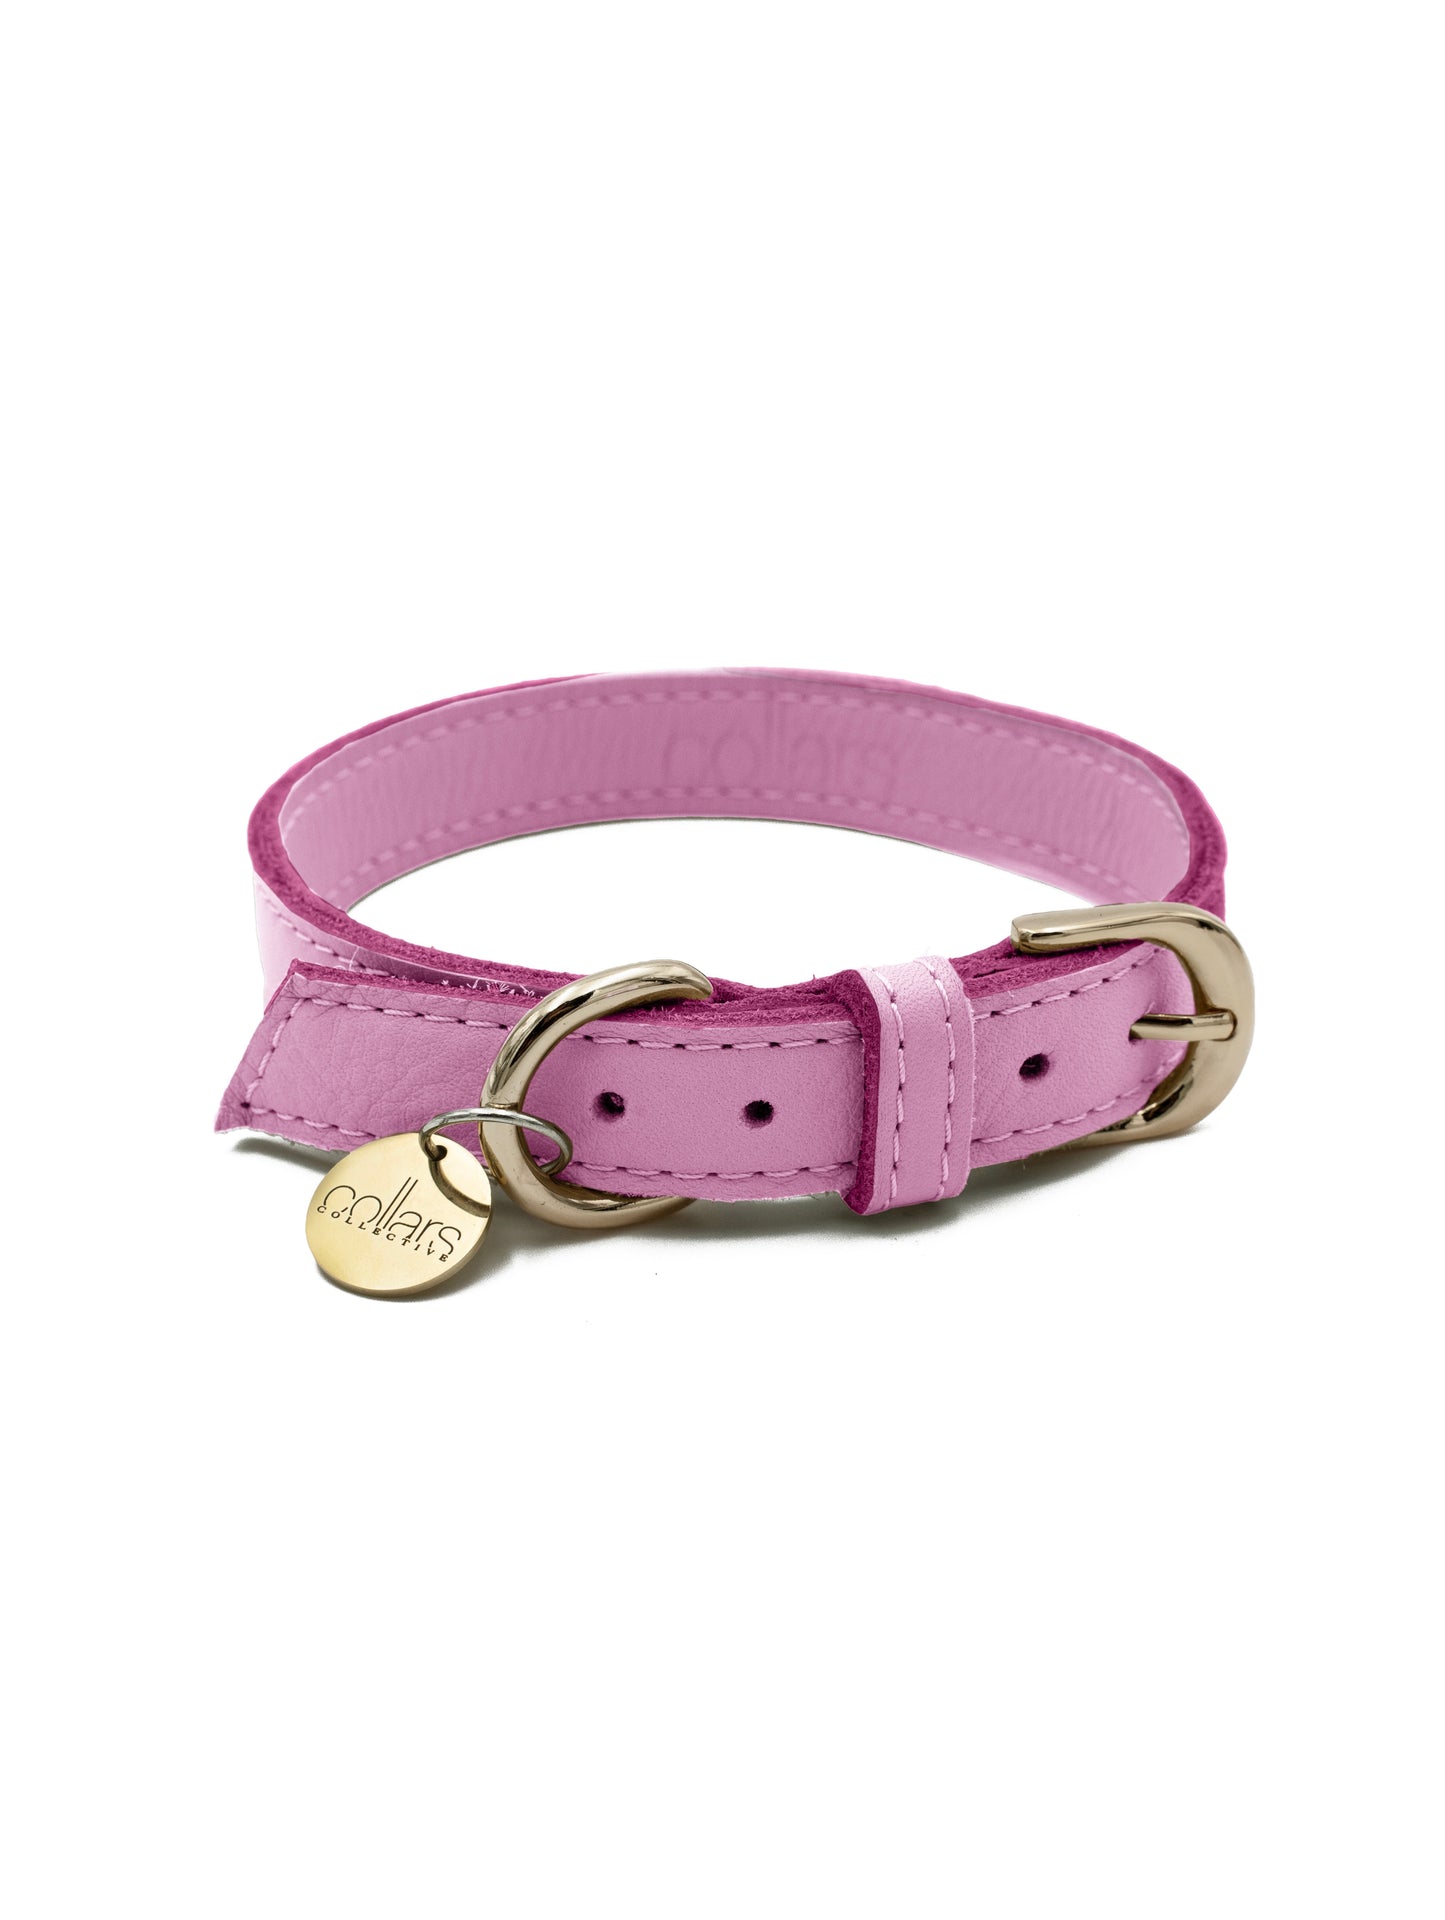 The Candy Tag Collar